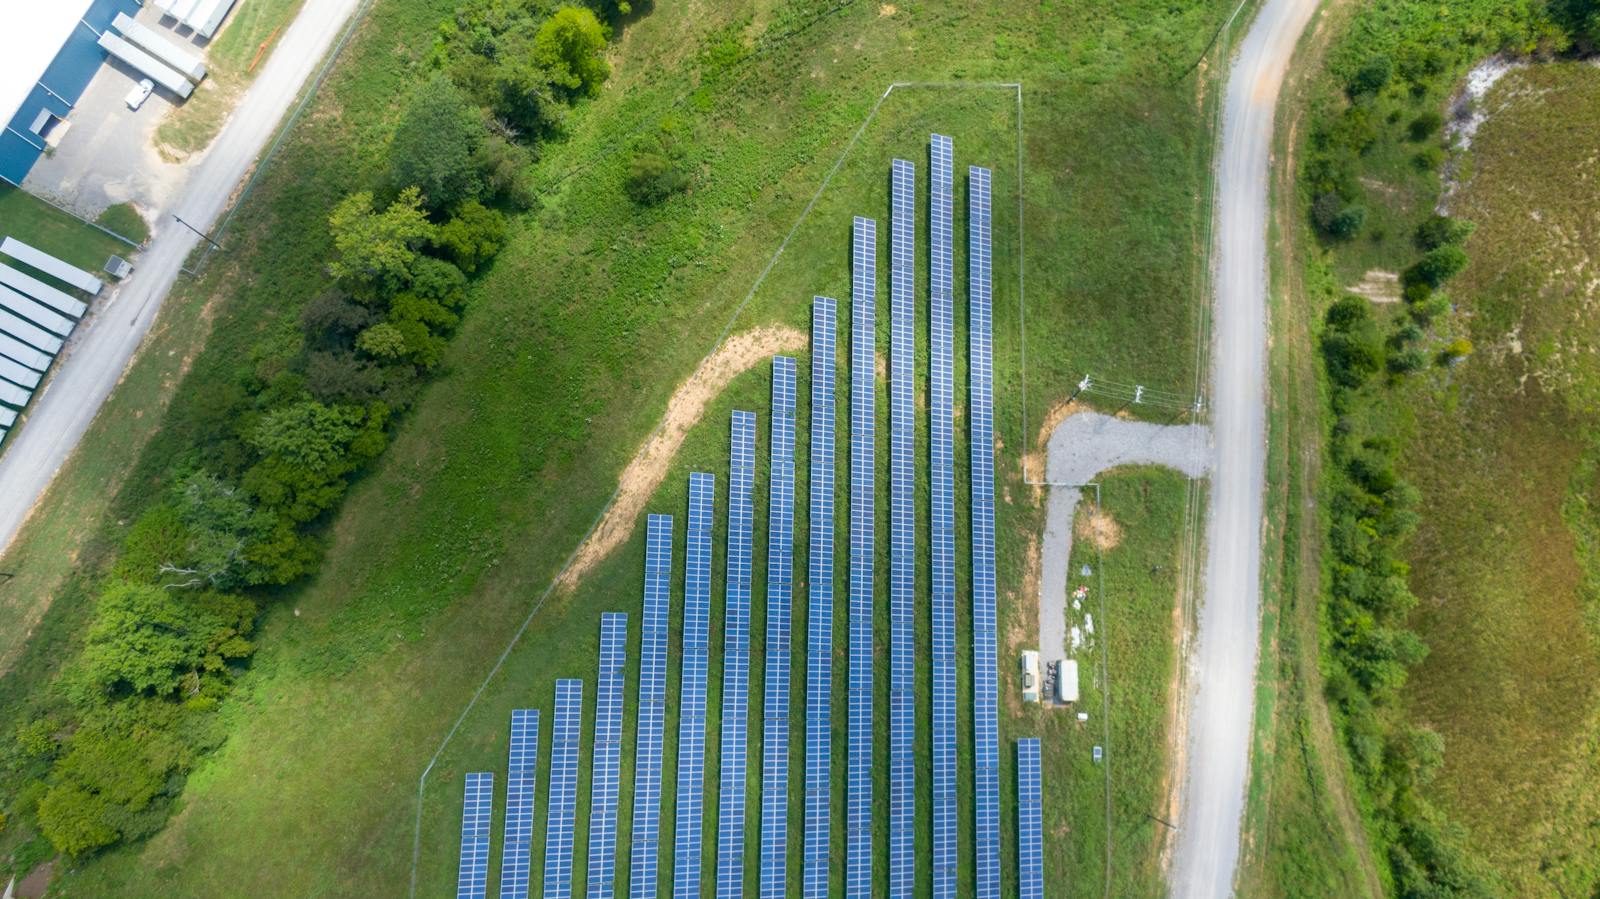 Aerial View of Solar Panels Array on Green Grass